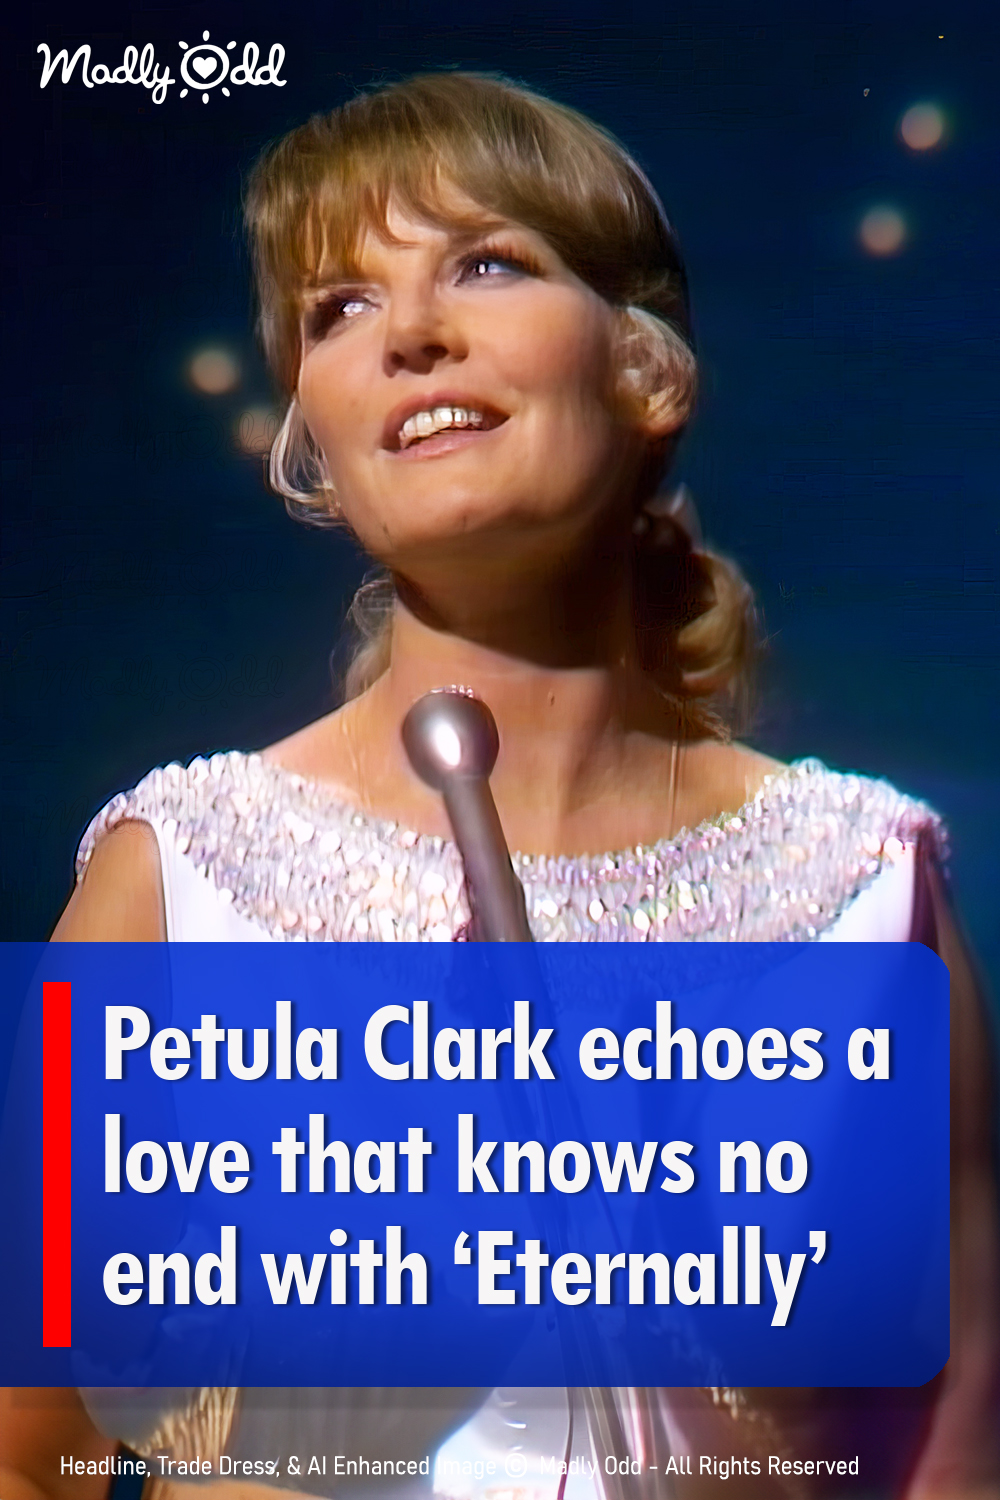 Petula Clark echoes a love that knows no end with ‘Eternally’ (1967)